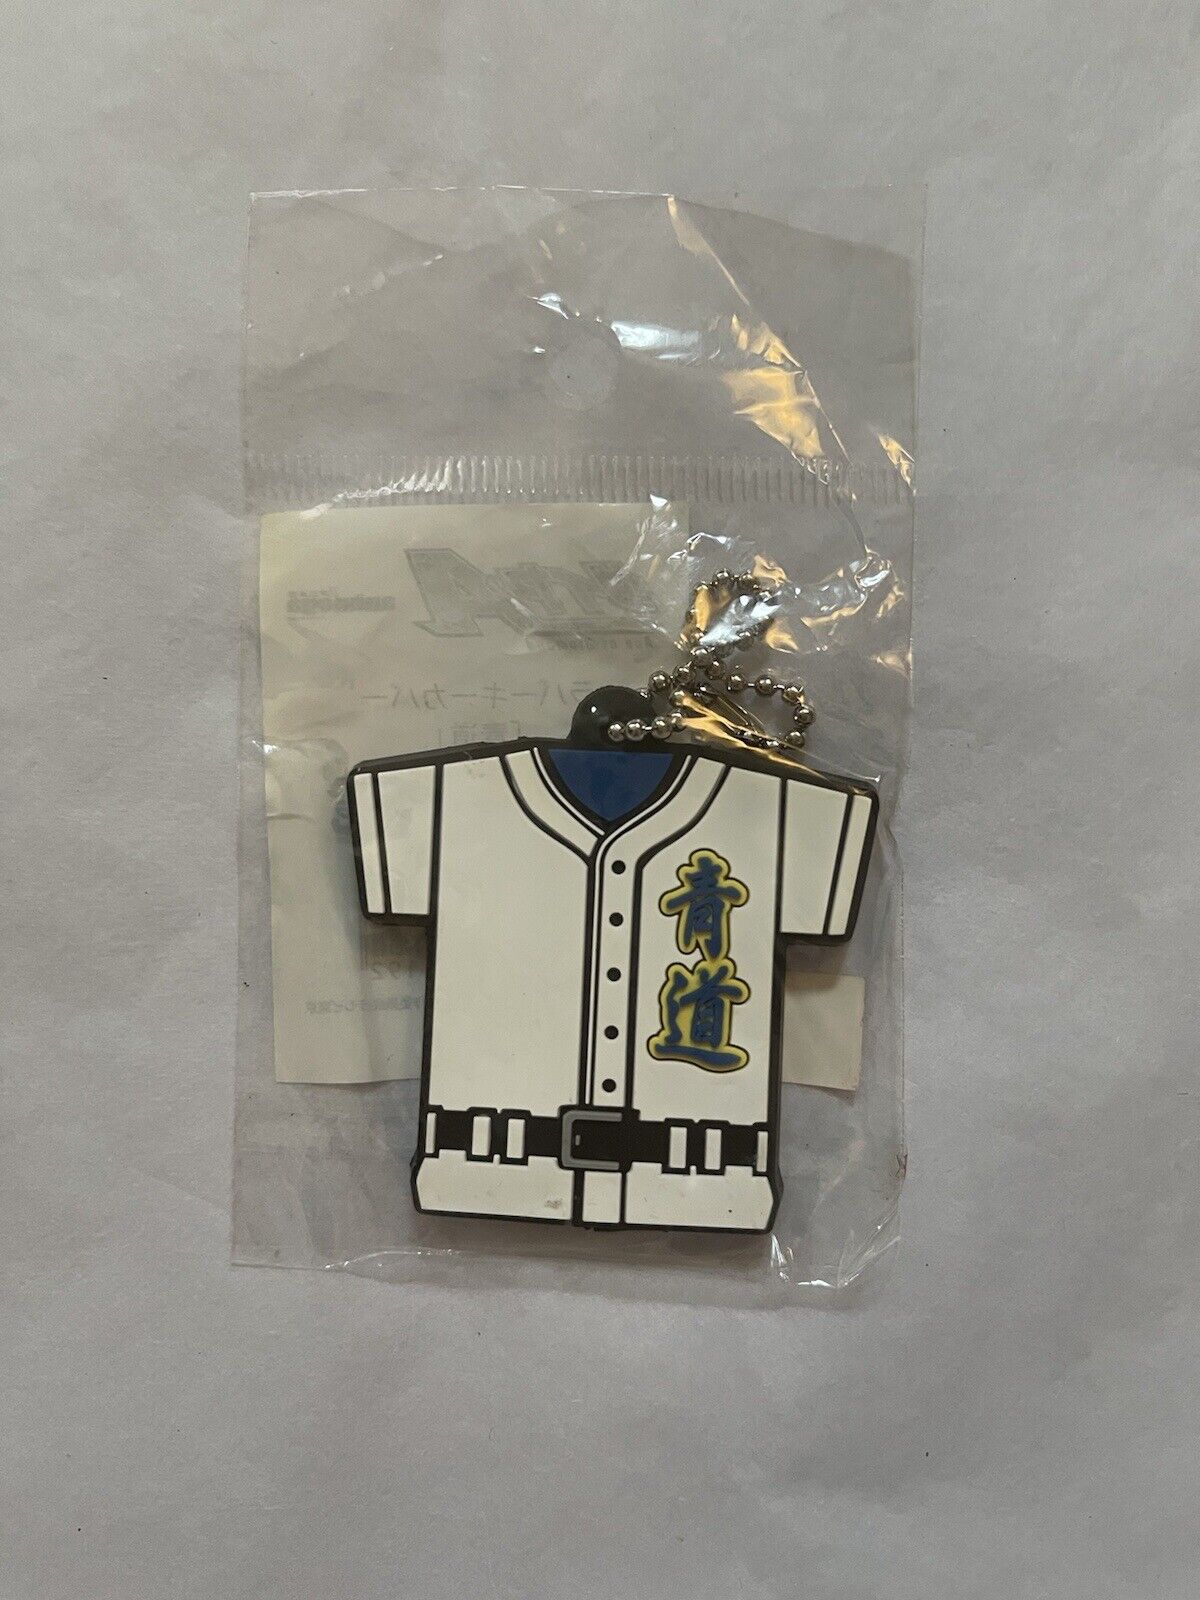 New Ace of Diamonds keychain from japan